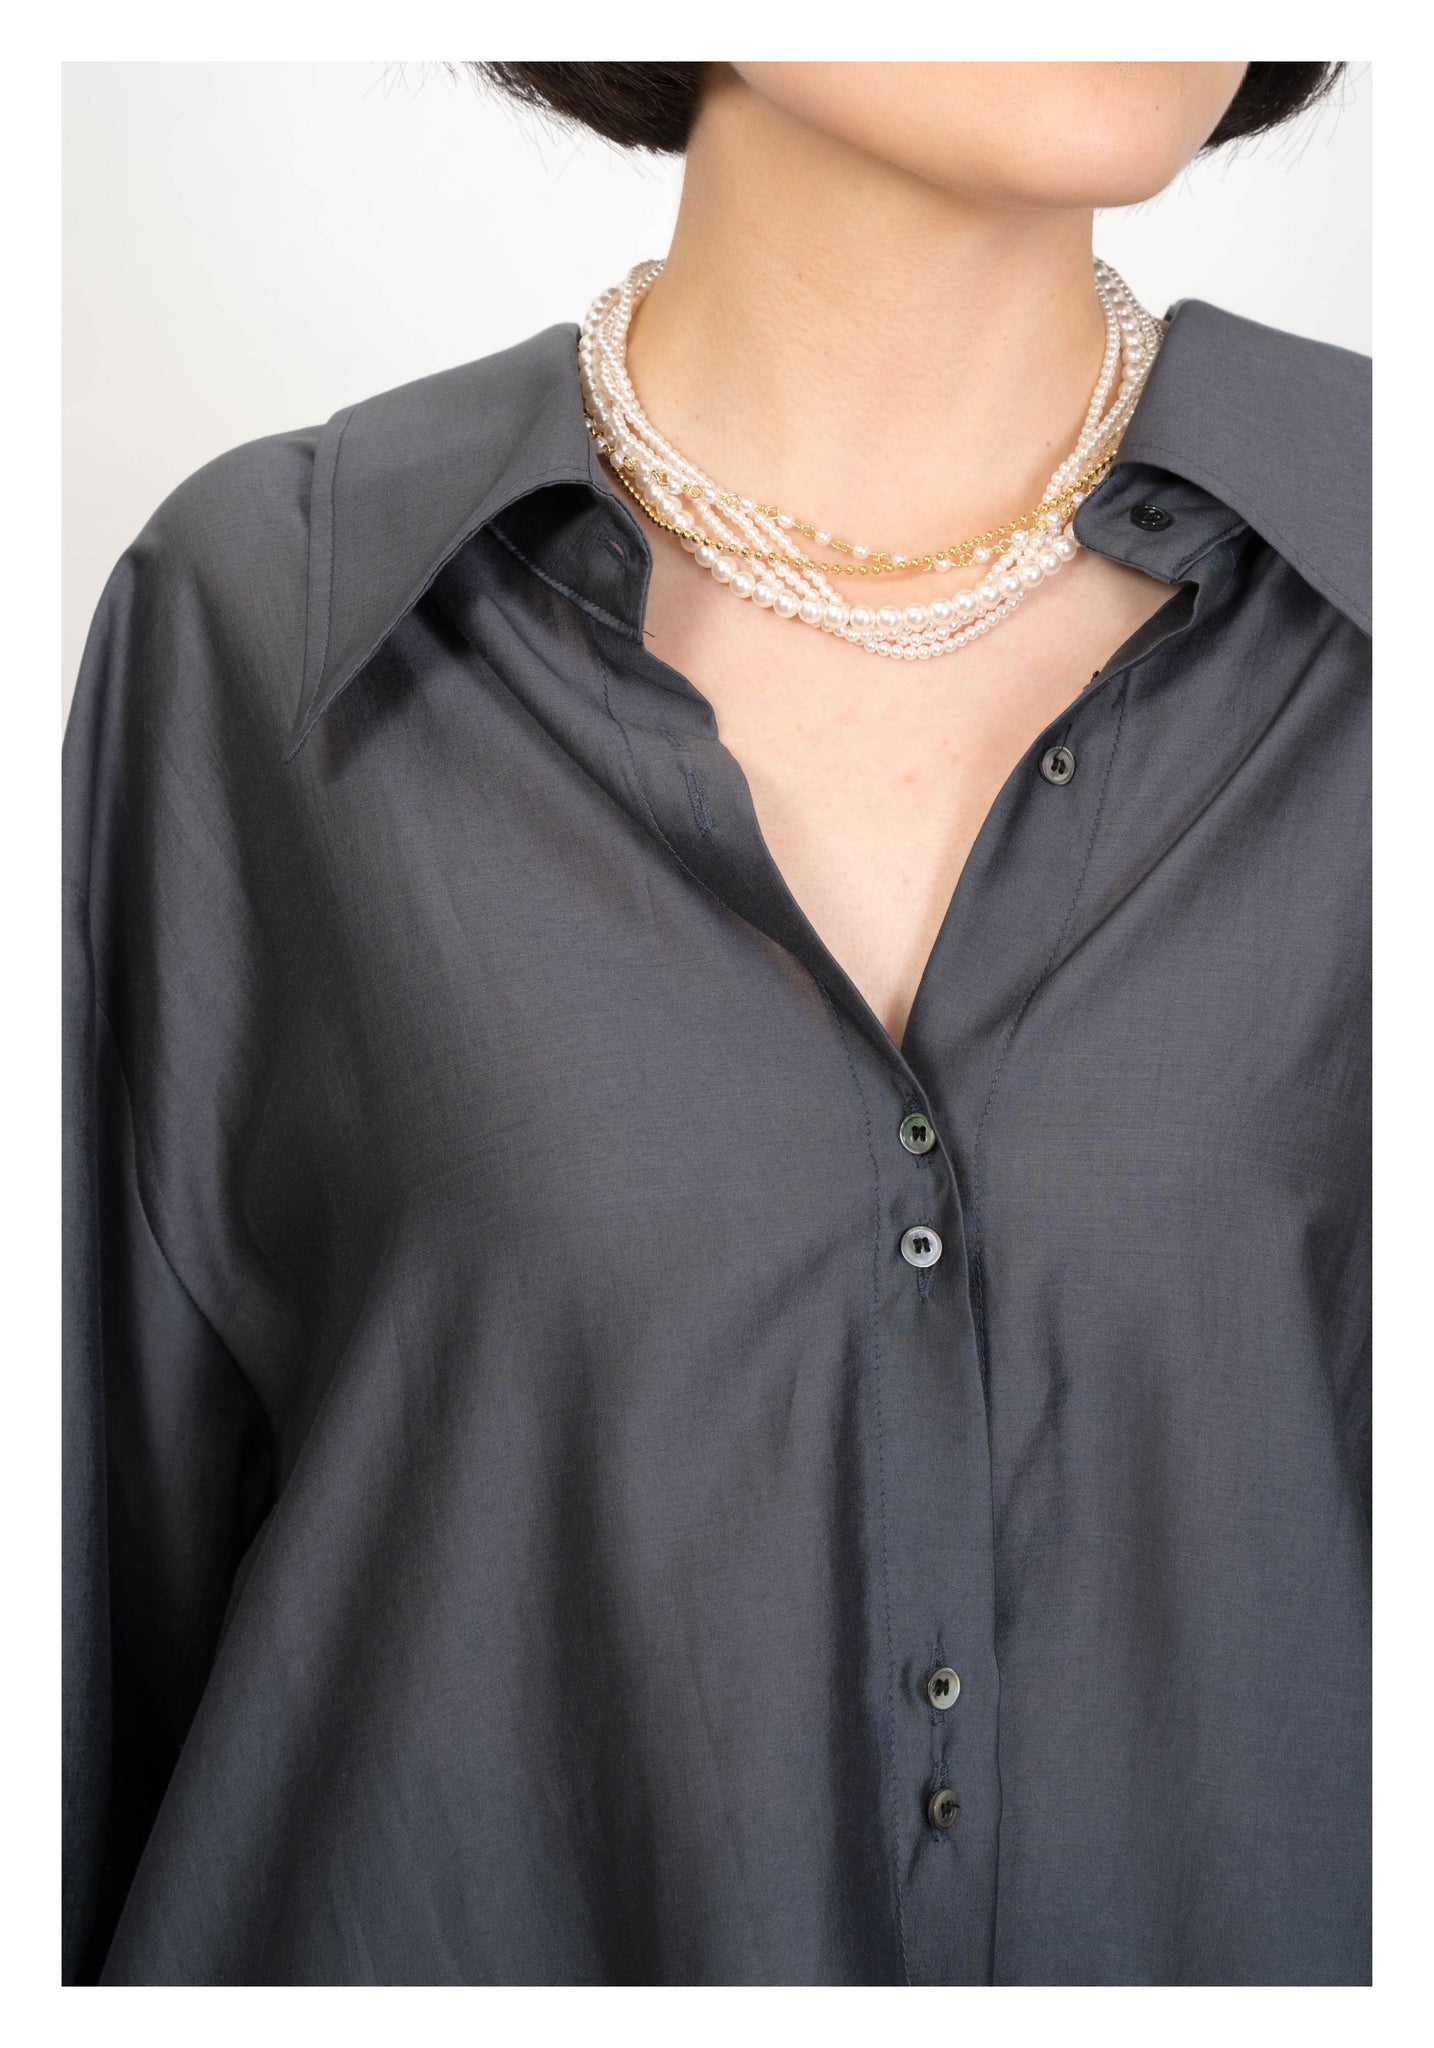 Mixed Faux Pearl Elegant Necklace - whoami